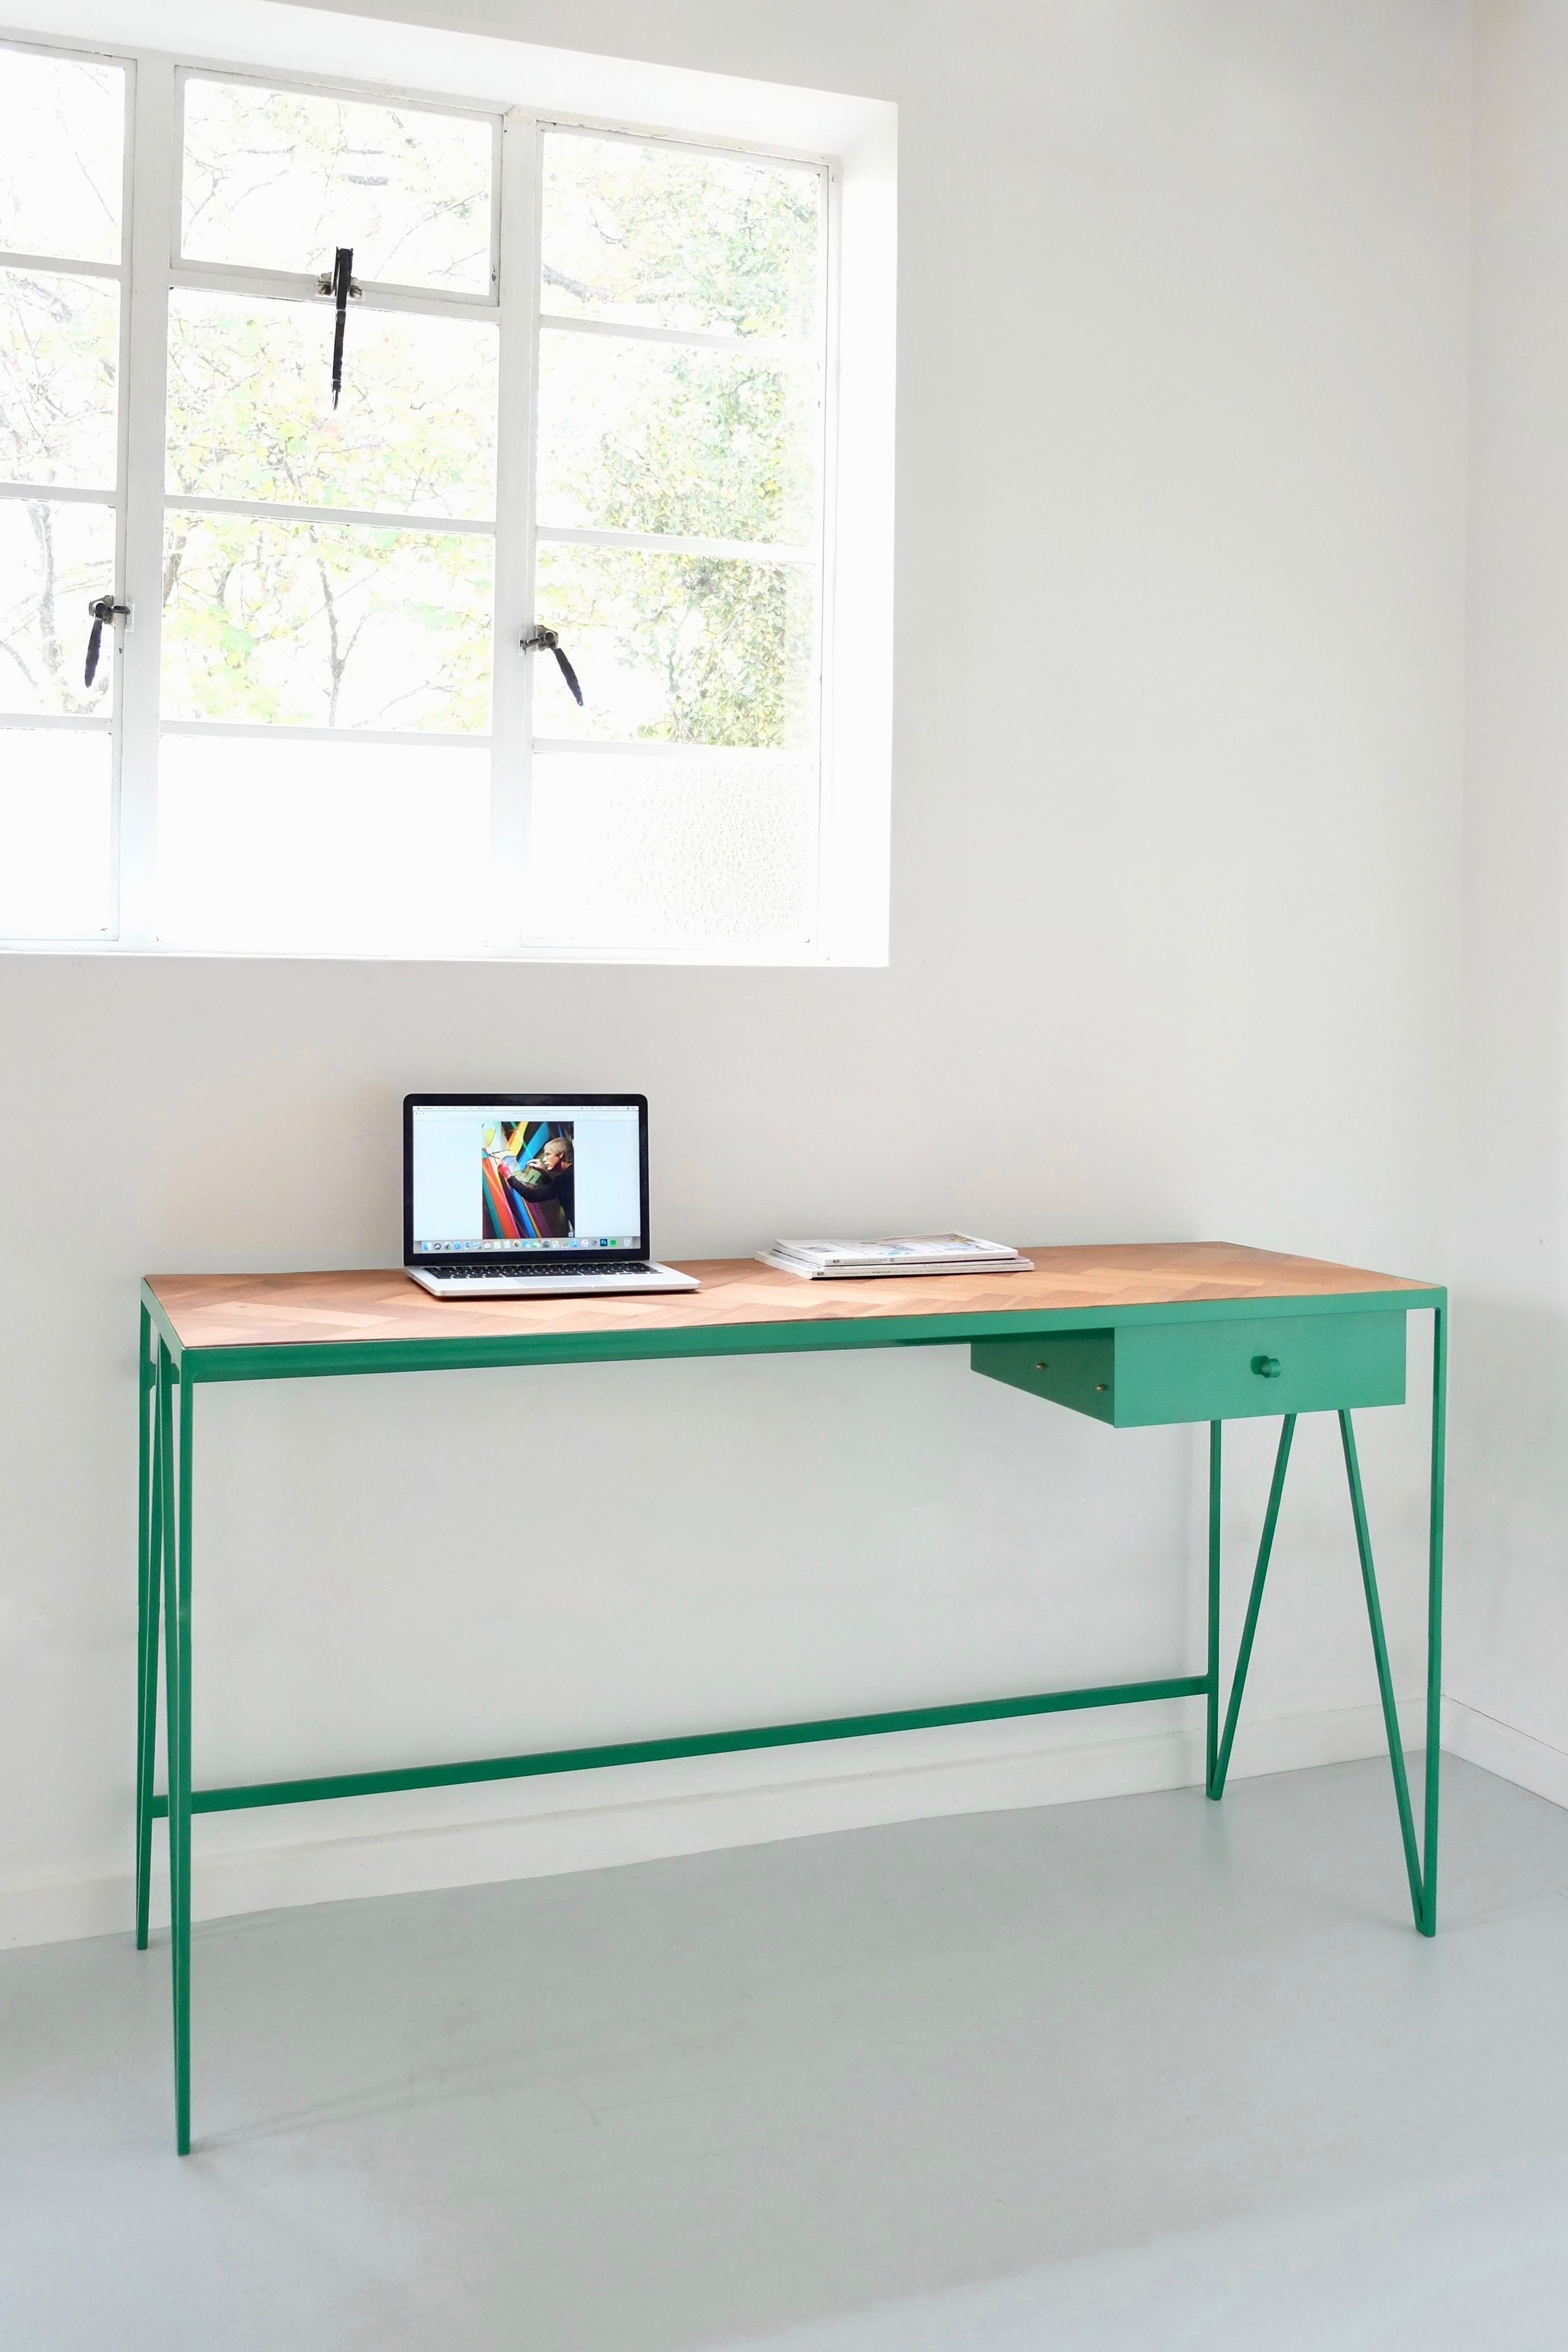 The Study desk is made with a green powder coated steel frame and a beautiful parquet wood table top. This minimal desk has a steel drawer suspended underneath the table top with a loop handle. The parquet wood table top is handmade from reclaimed